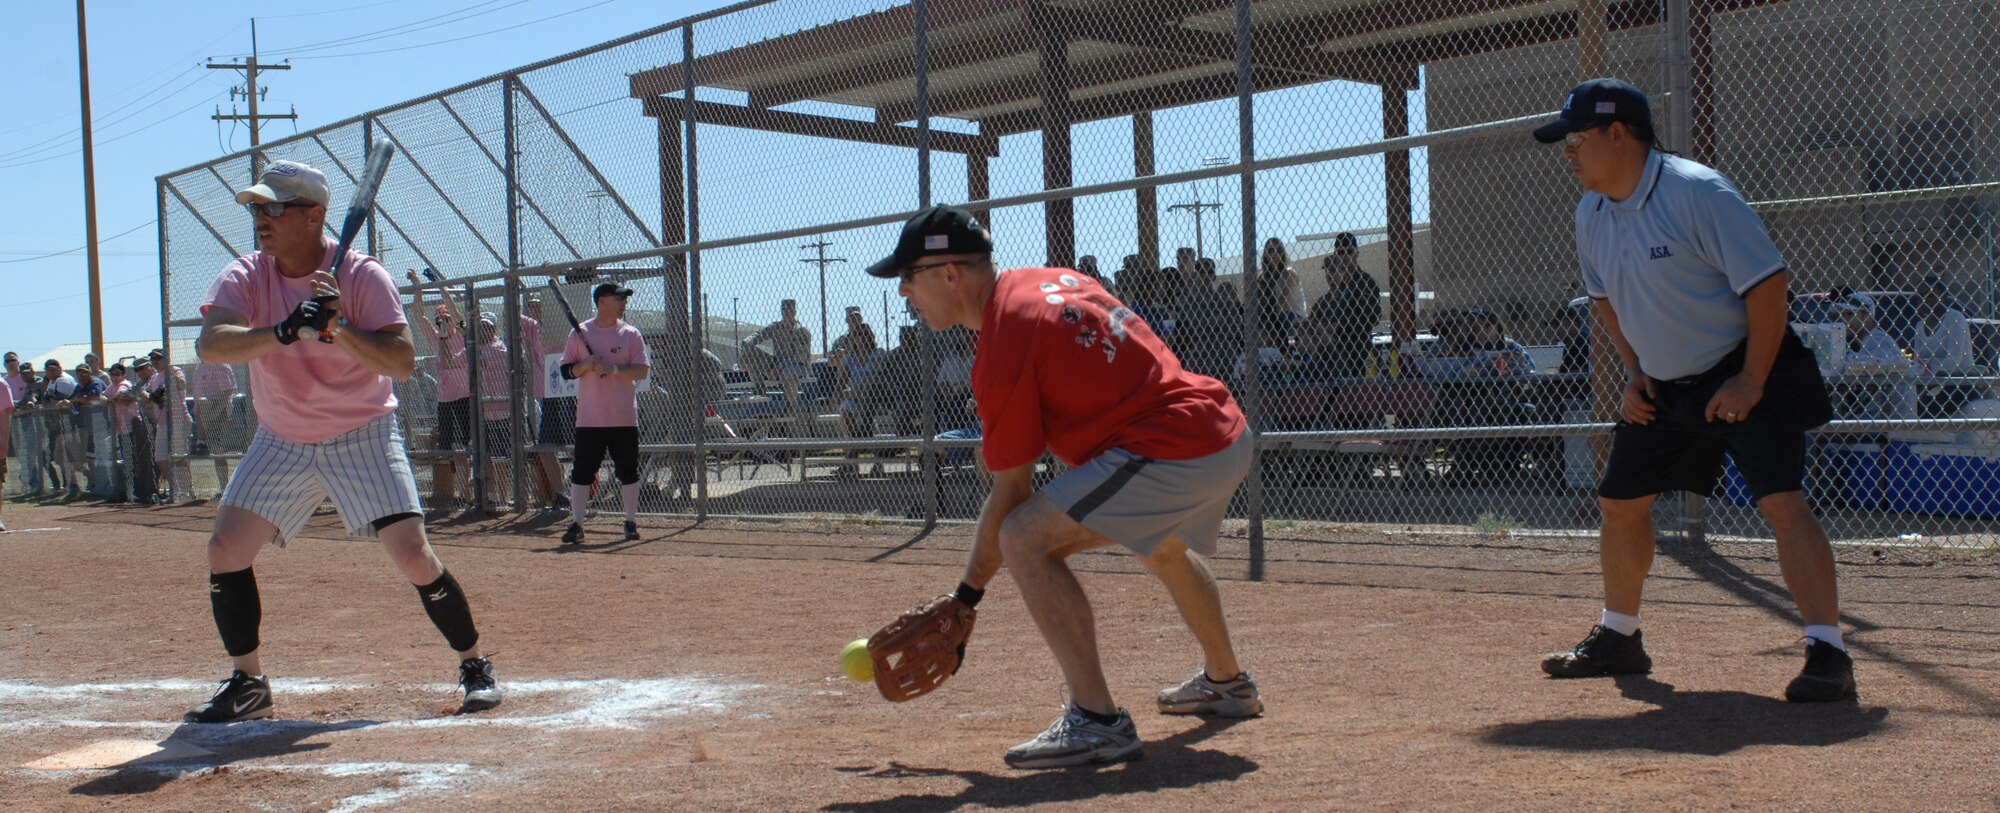 U.S. Air Force Col. John Cherry, 355th Fighter Wing commander, acts as catcher during the Chiefs vs. Eagles softball game at Thunderbolt Field on Davis-Monthan Air Force Base, Ariz., March 23. The Eagles took the victory over the Chiefs, with the final score being 15-14. (U.S. Air Force photo by Airman 1st Class Saphfire Cook/Released)